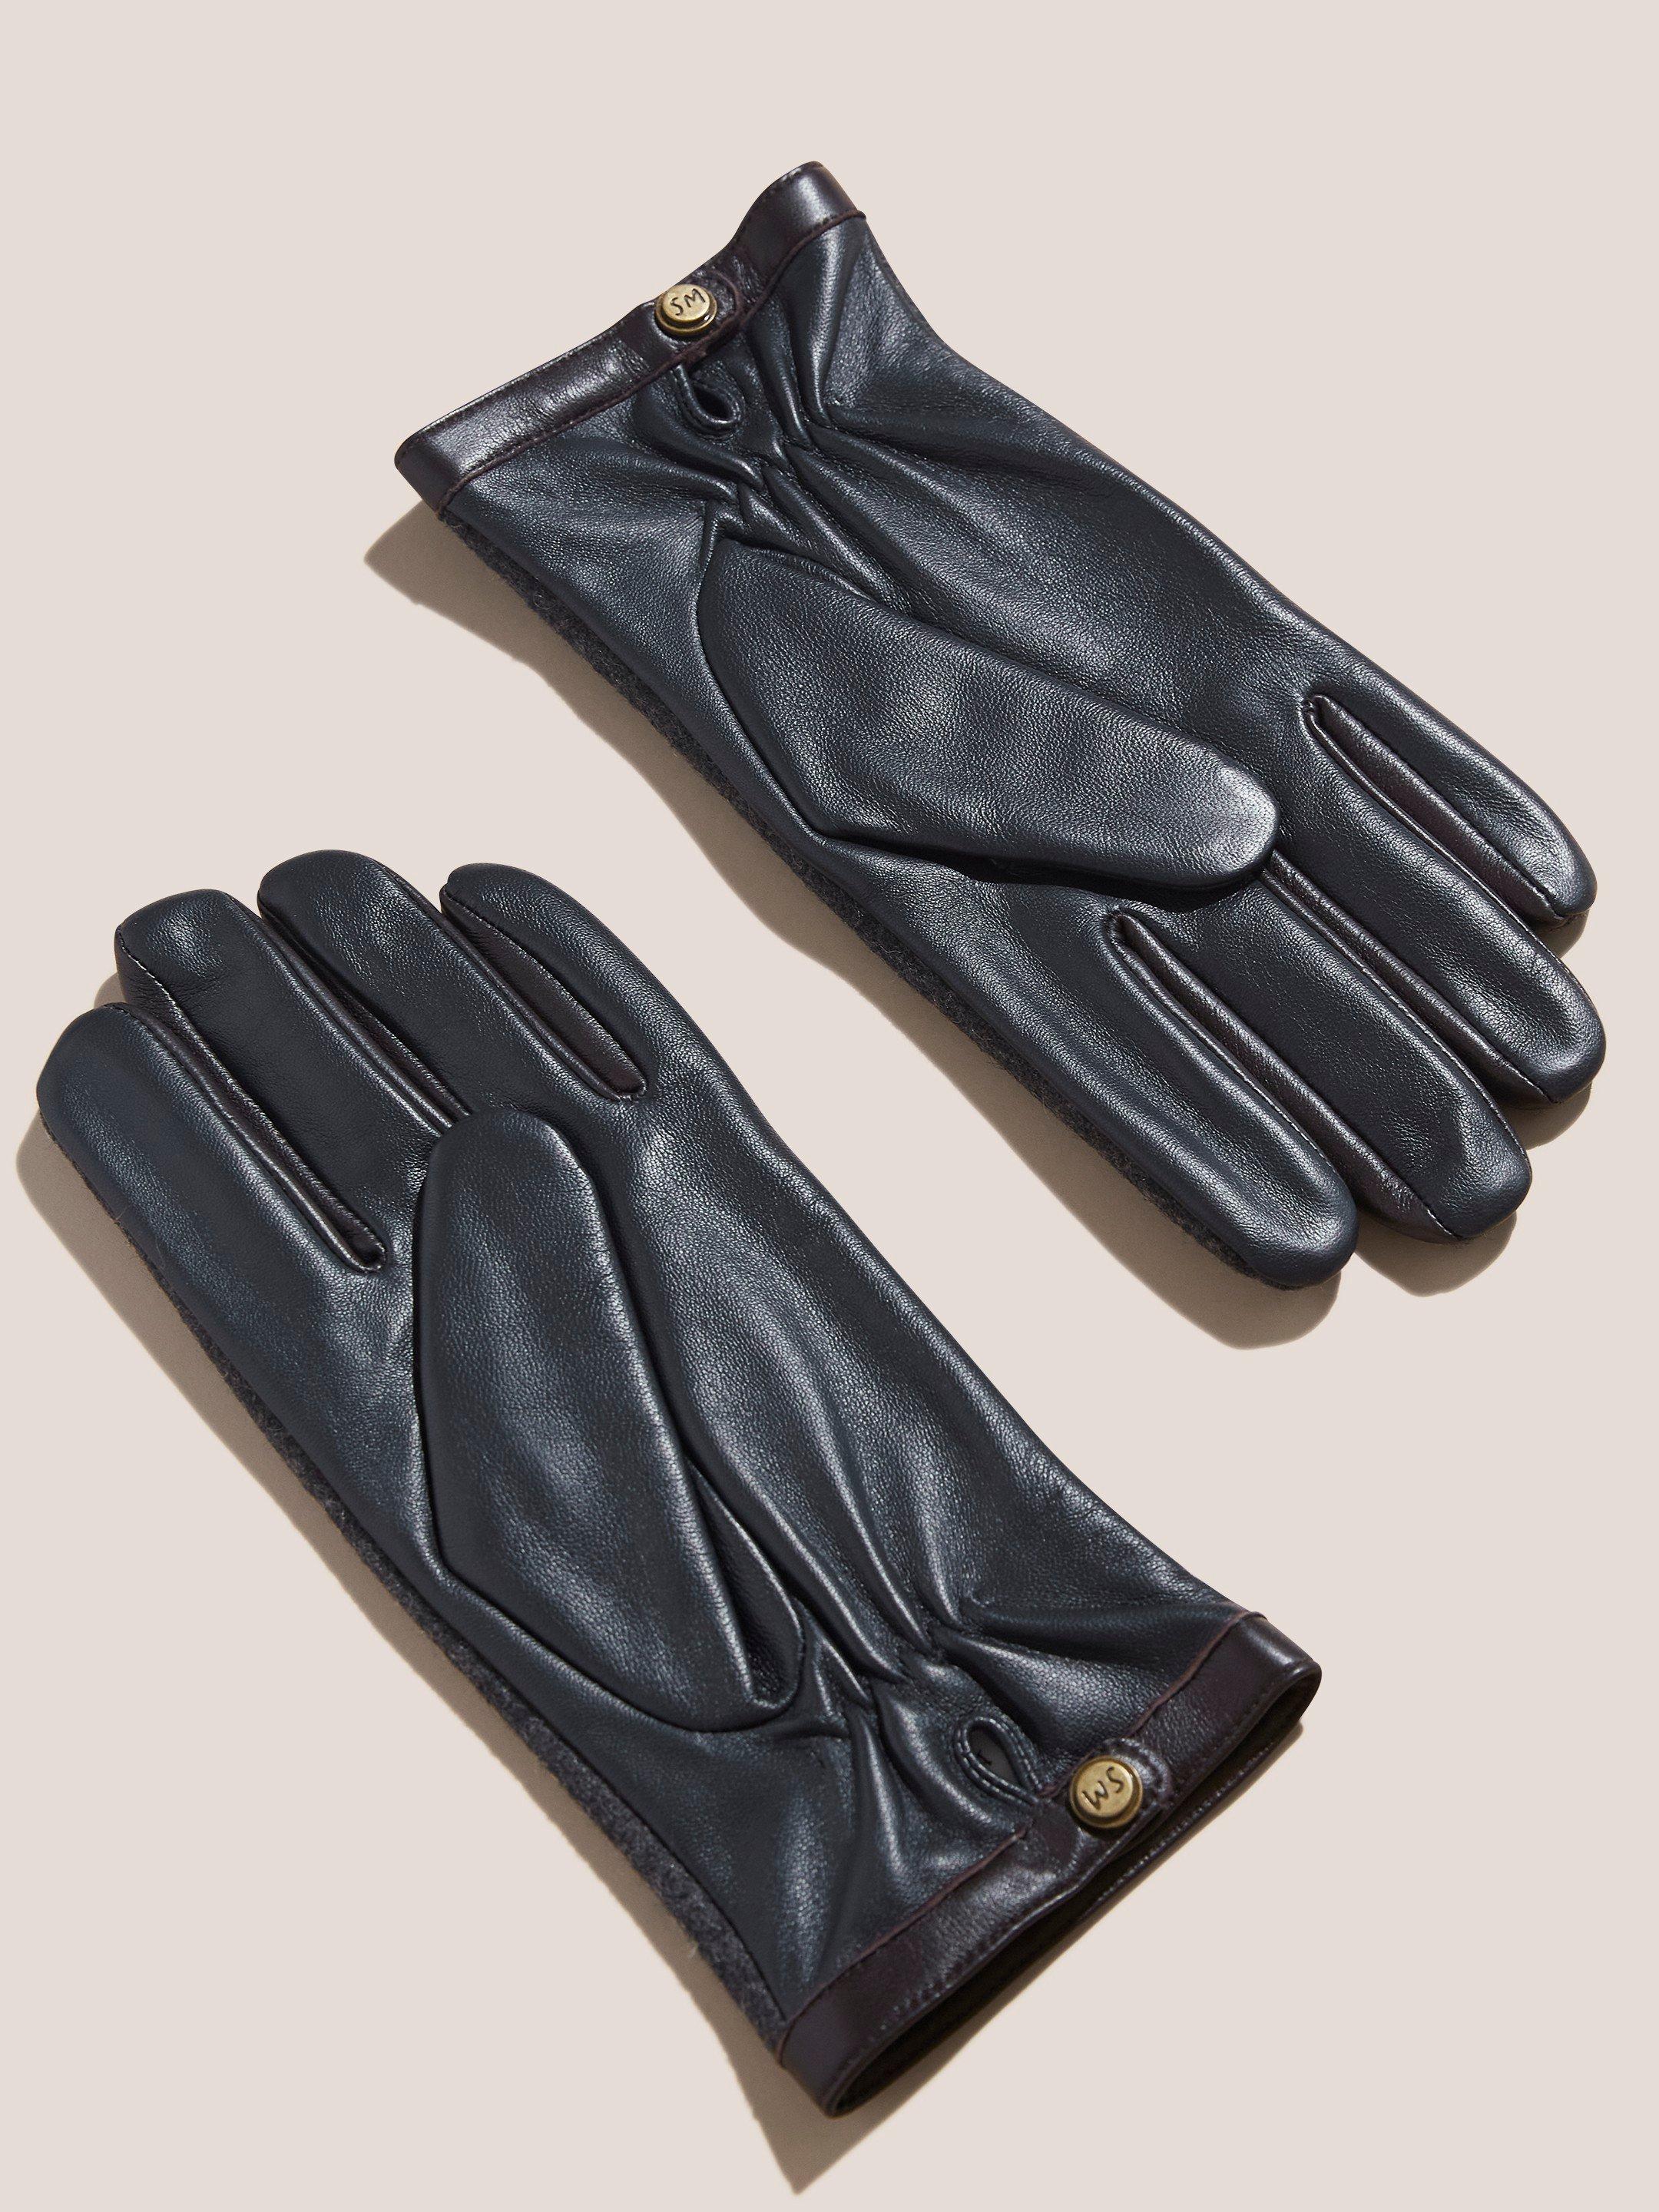 Lucas Leather Wool Mix Gloves in GREY MLT - FLAT BACK